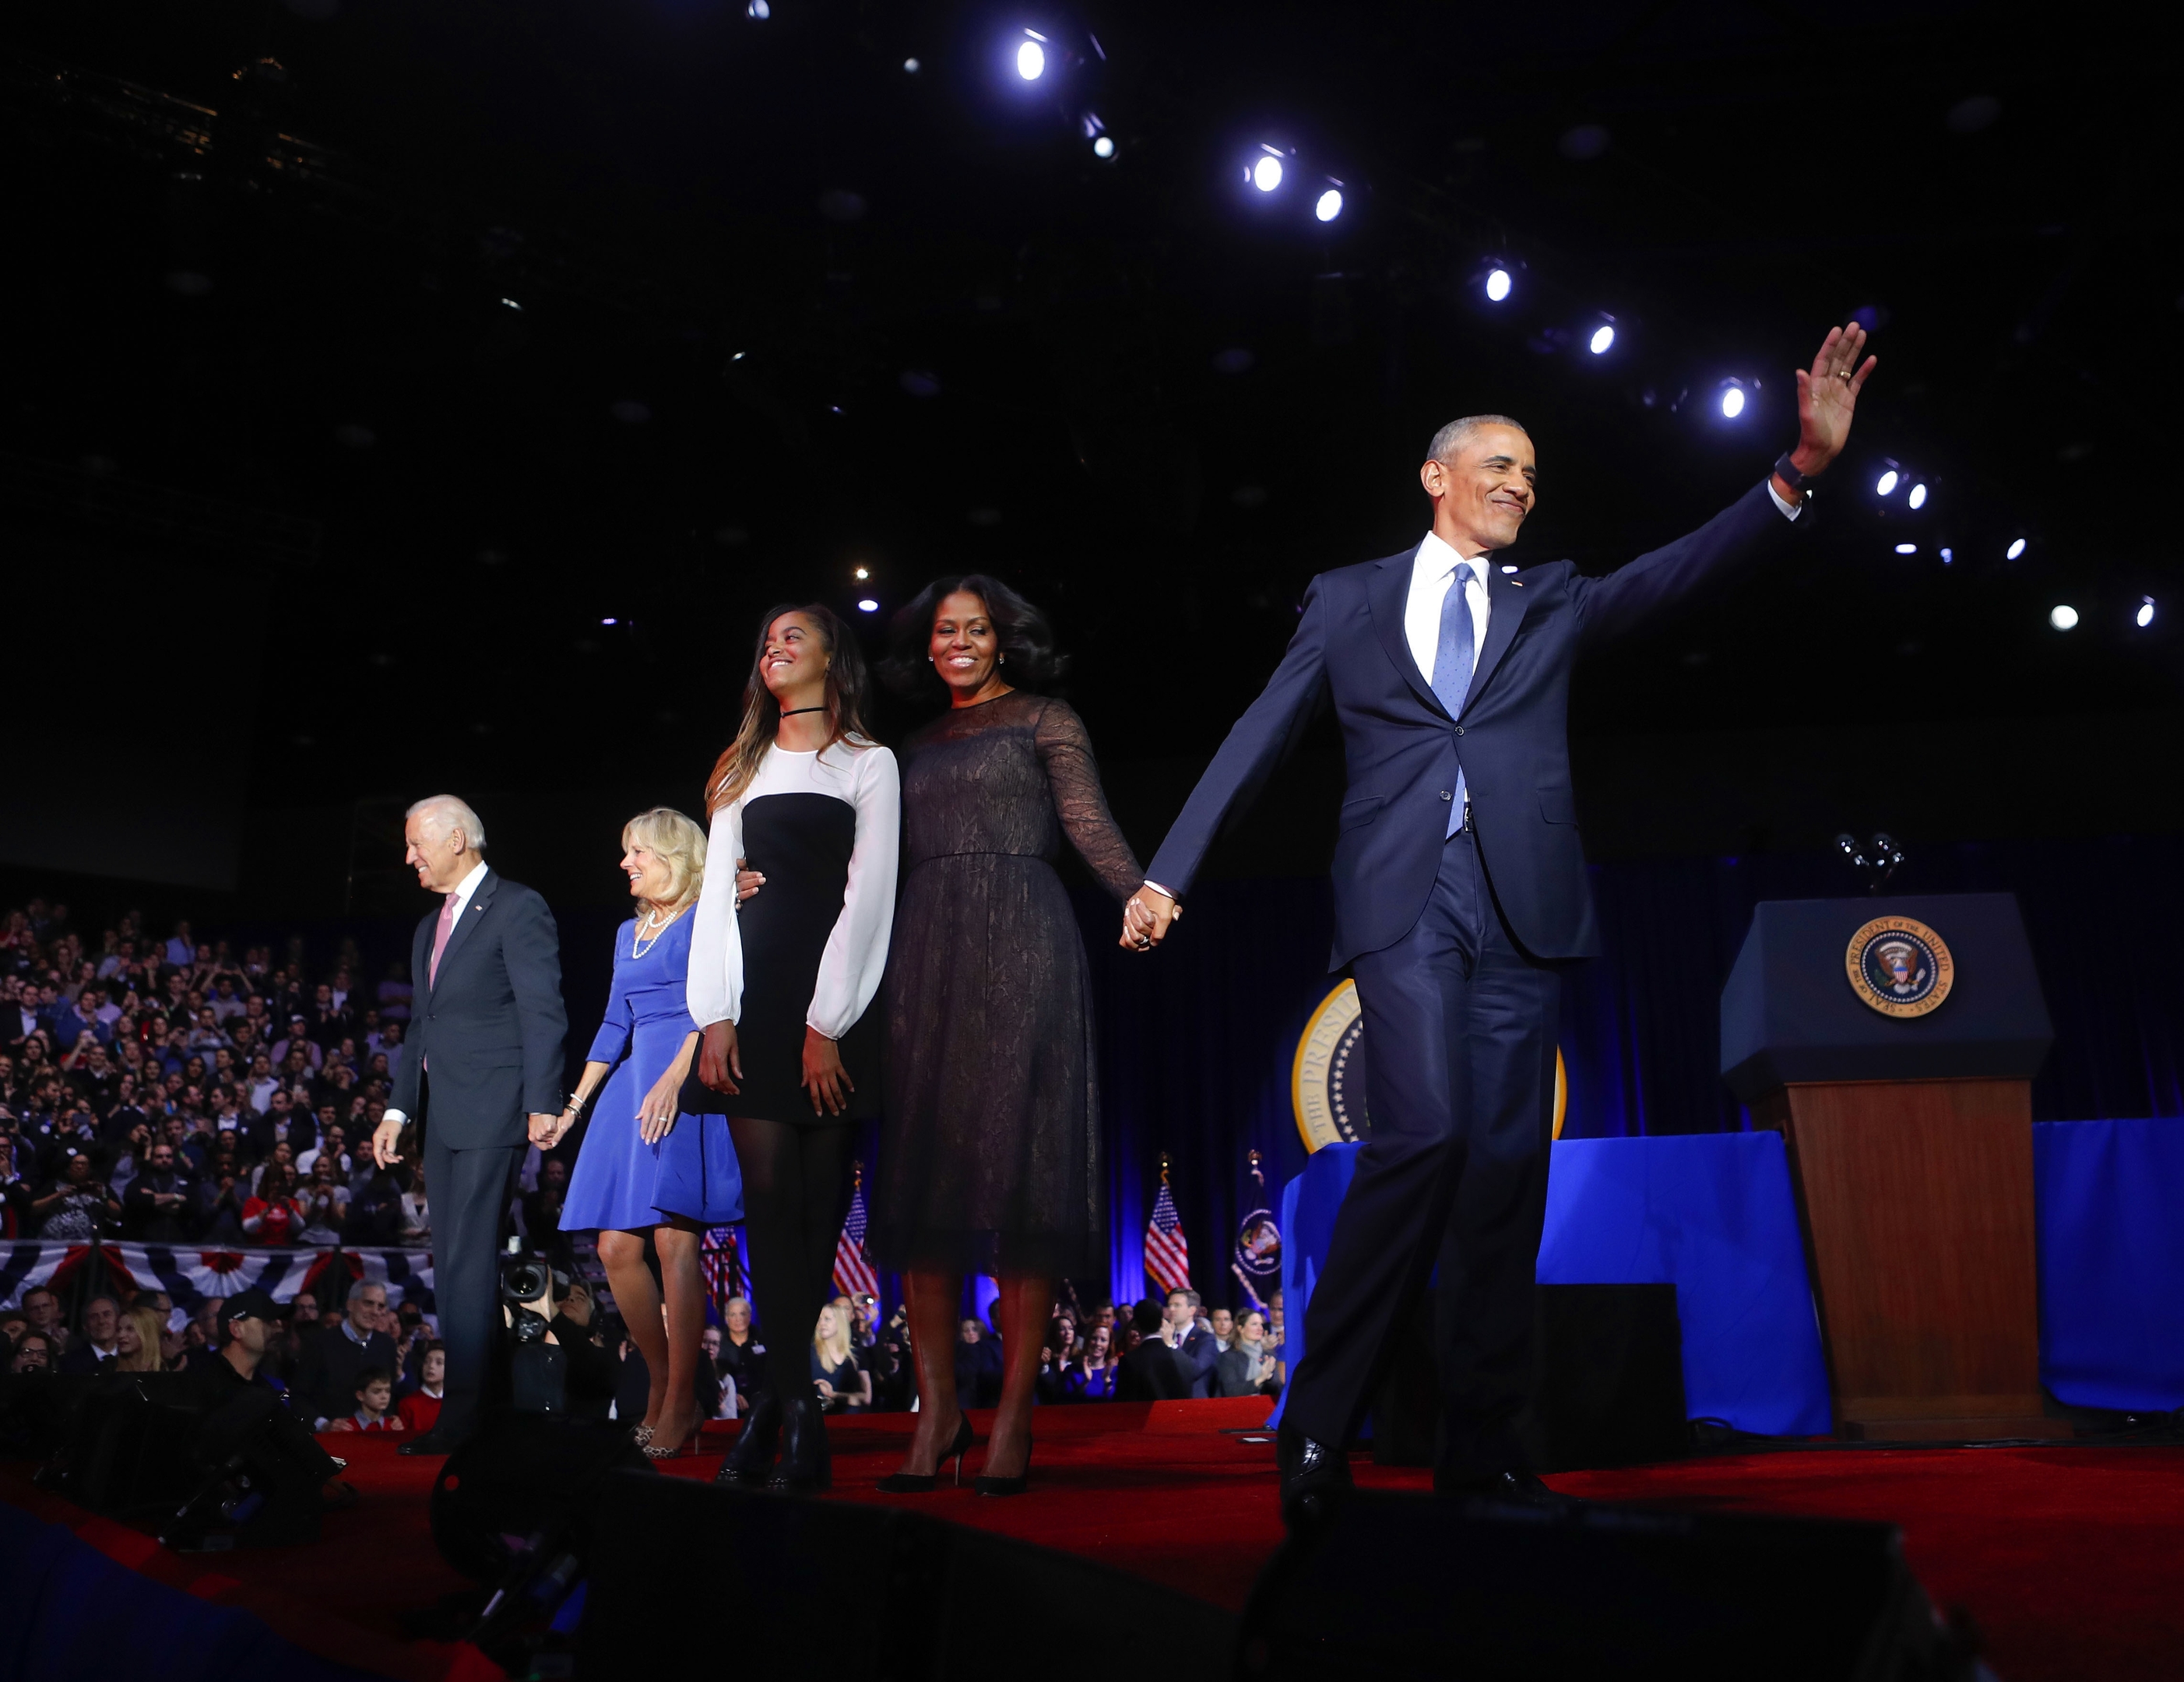 President Barack Obama waves on stage with first lady Michelle Obama, daughter Malia, Vice President Joe Biden and his wife Jill Biden after his farewell address at McCormick Place in Chicago